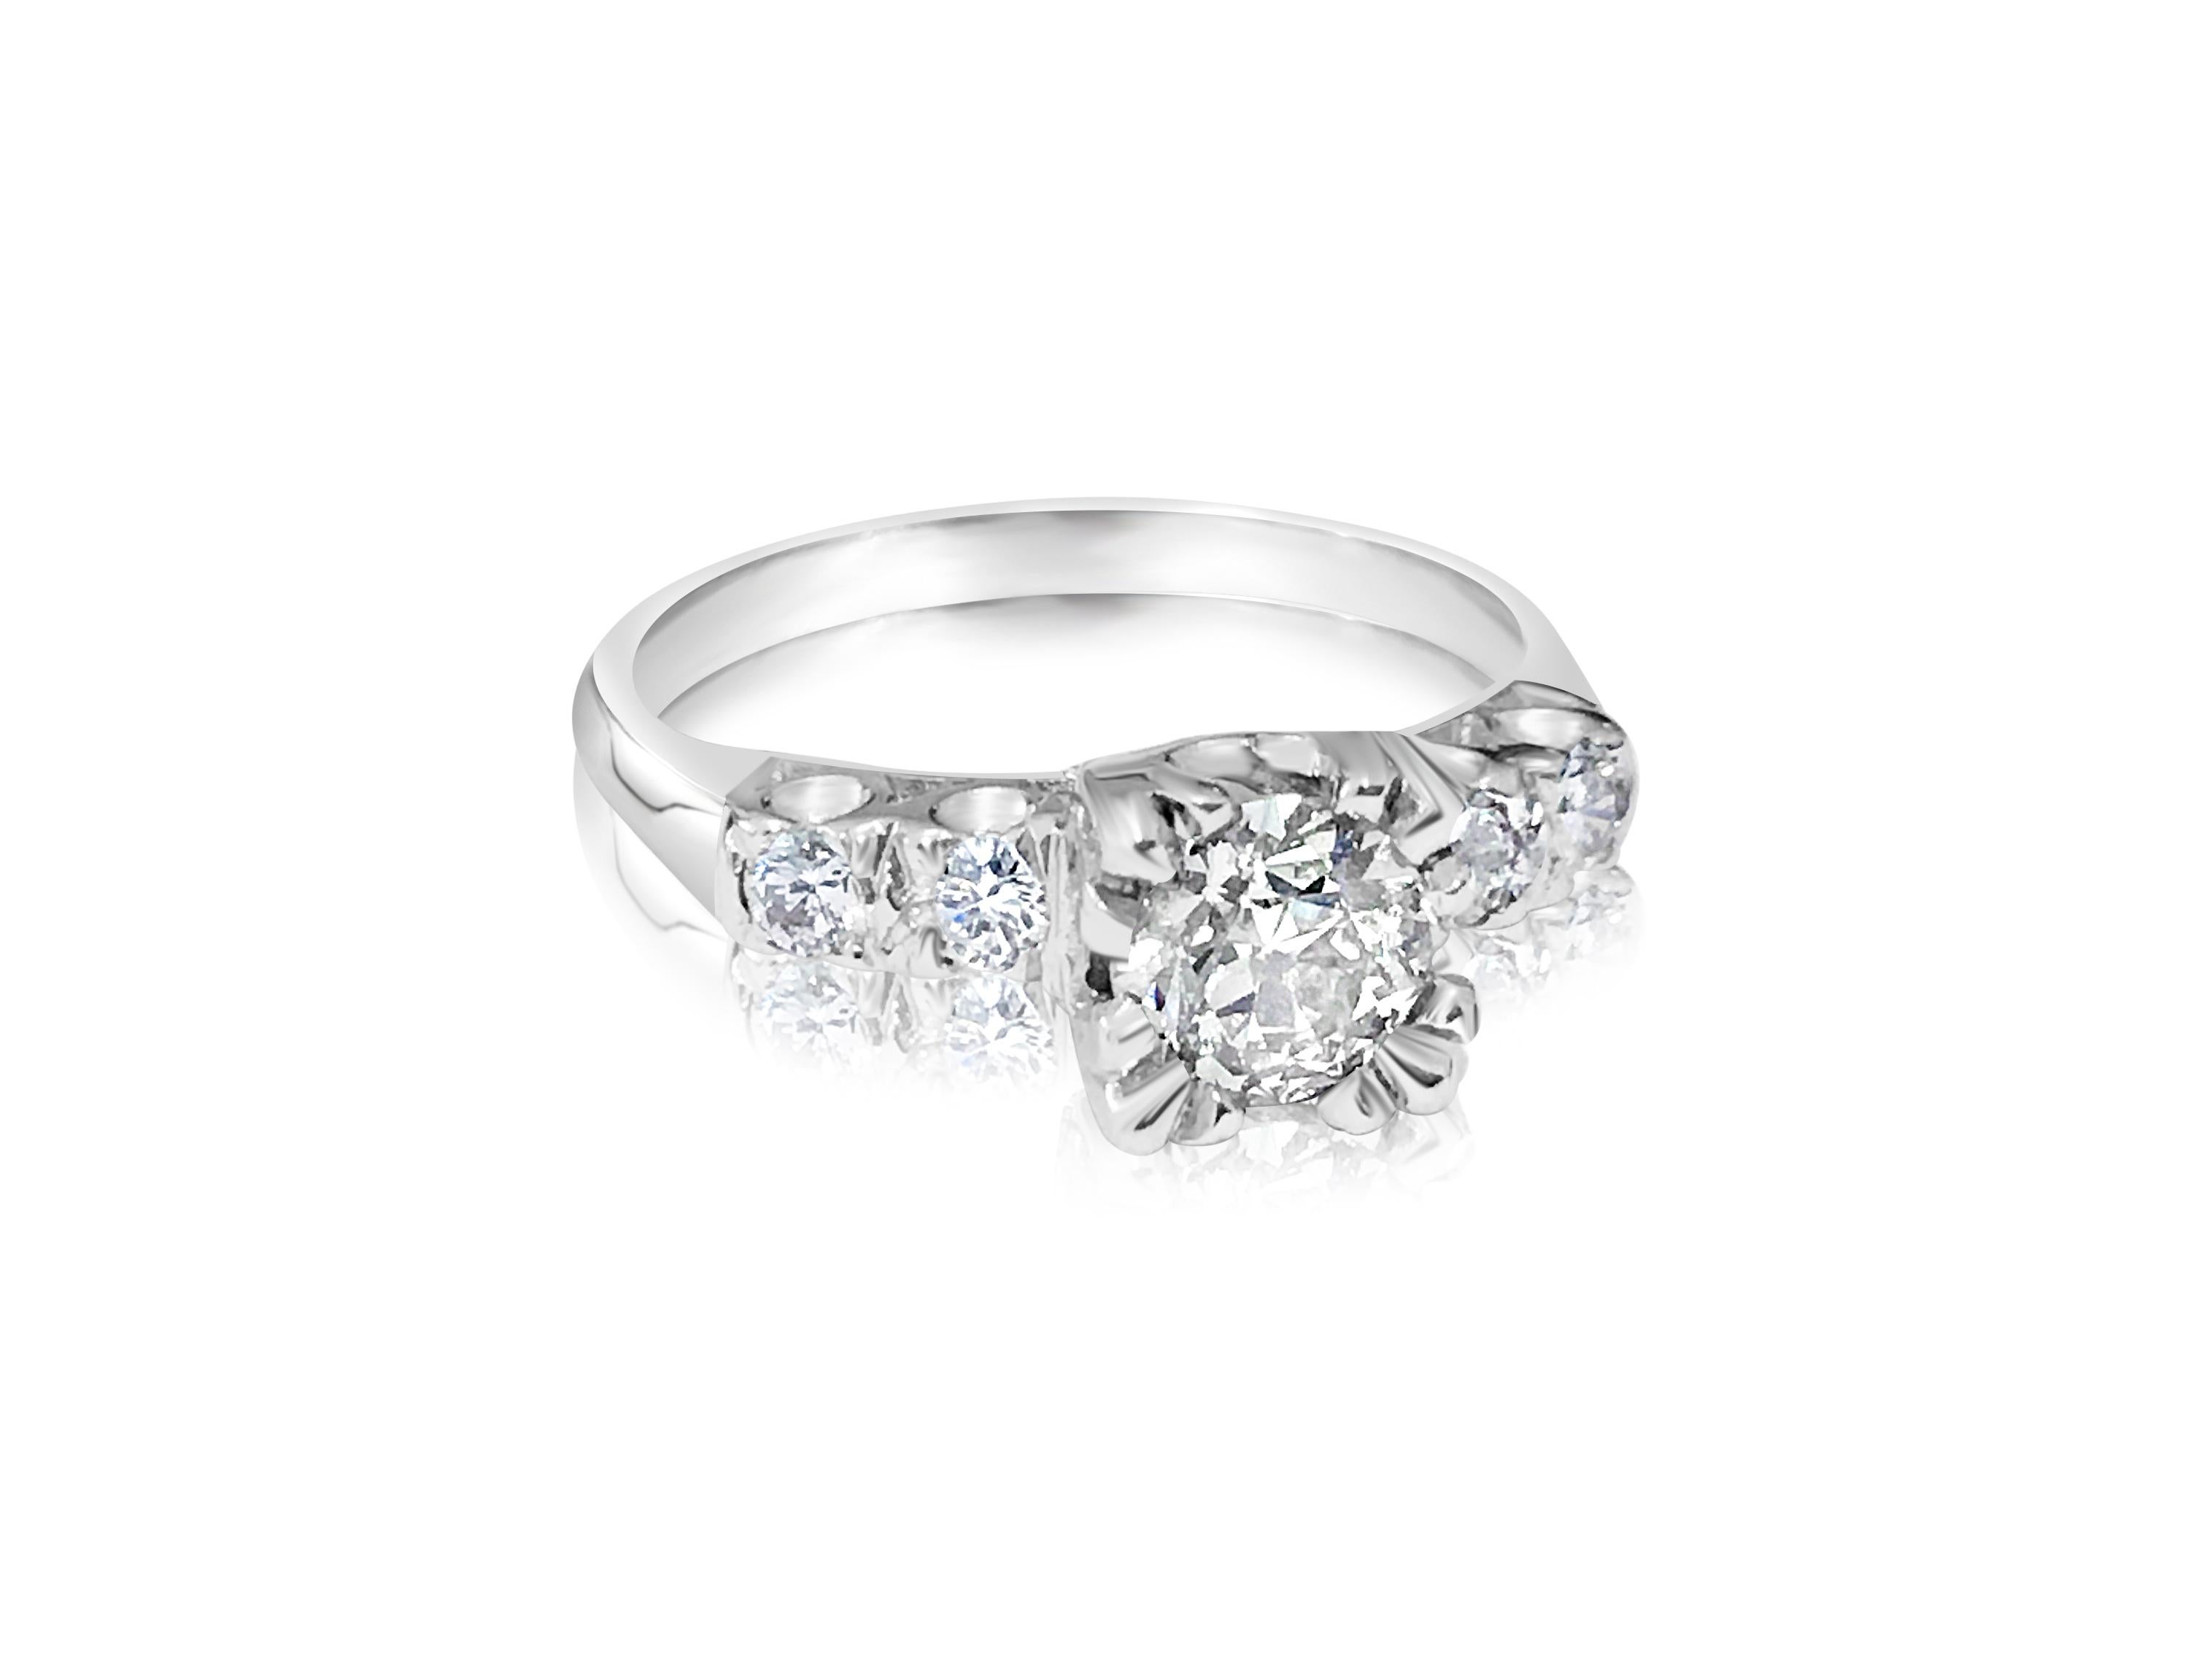 Art Deco GIA Certified 1.35 Carat Diamond Engagement Ring For Sale